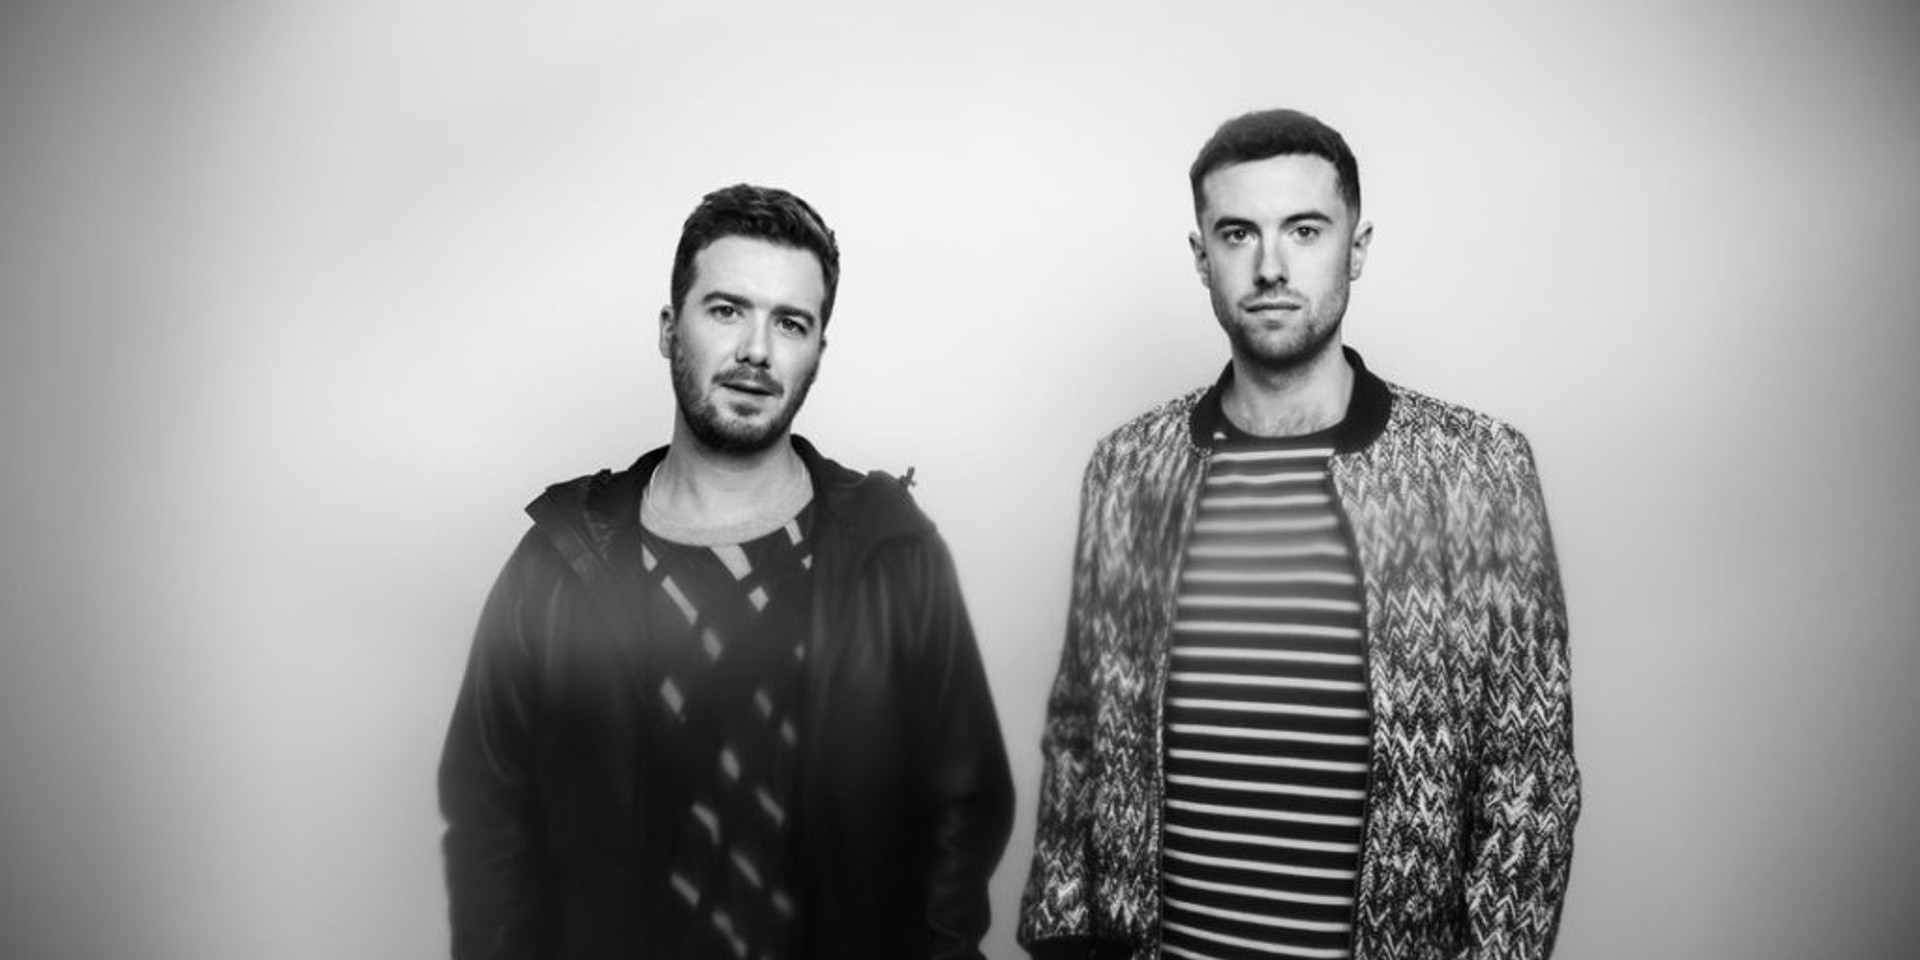 British club duo Gorgon City to perform in Singapore in May